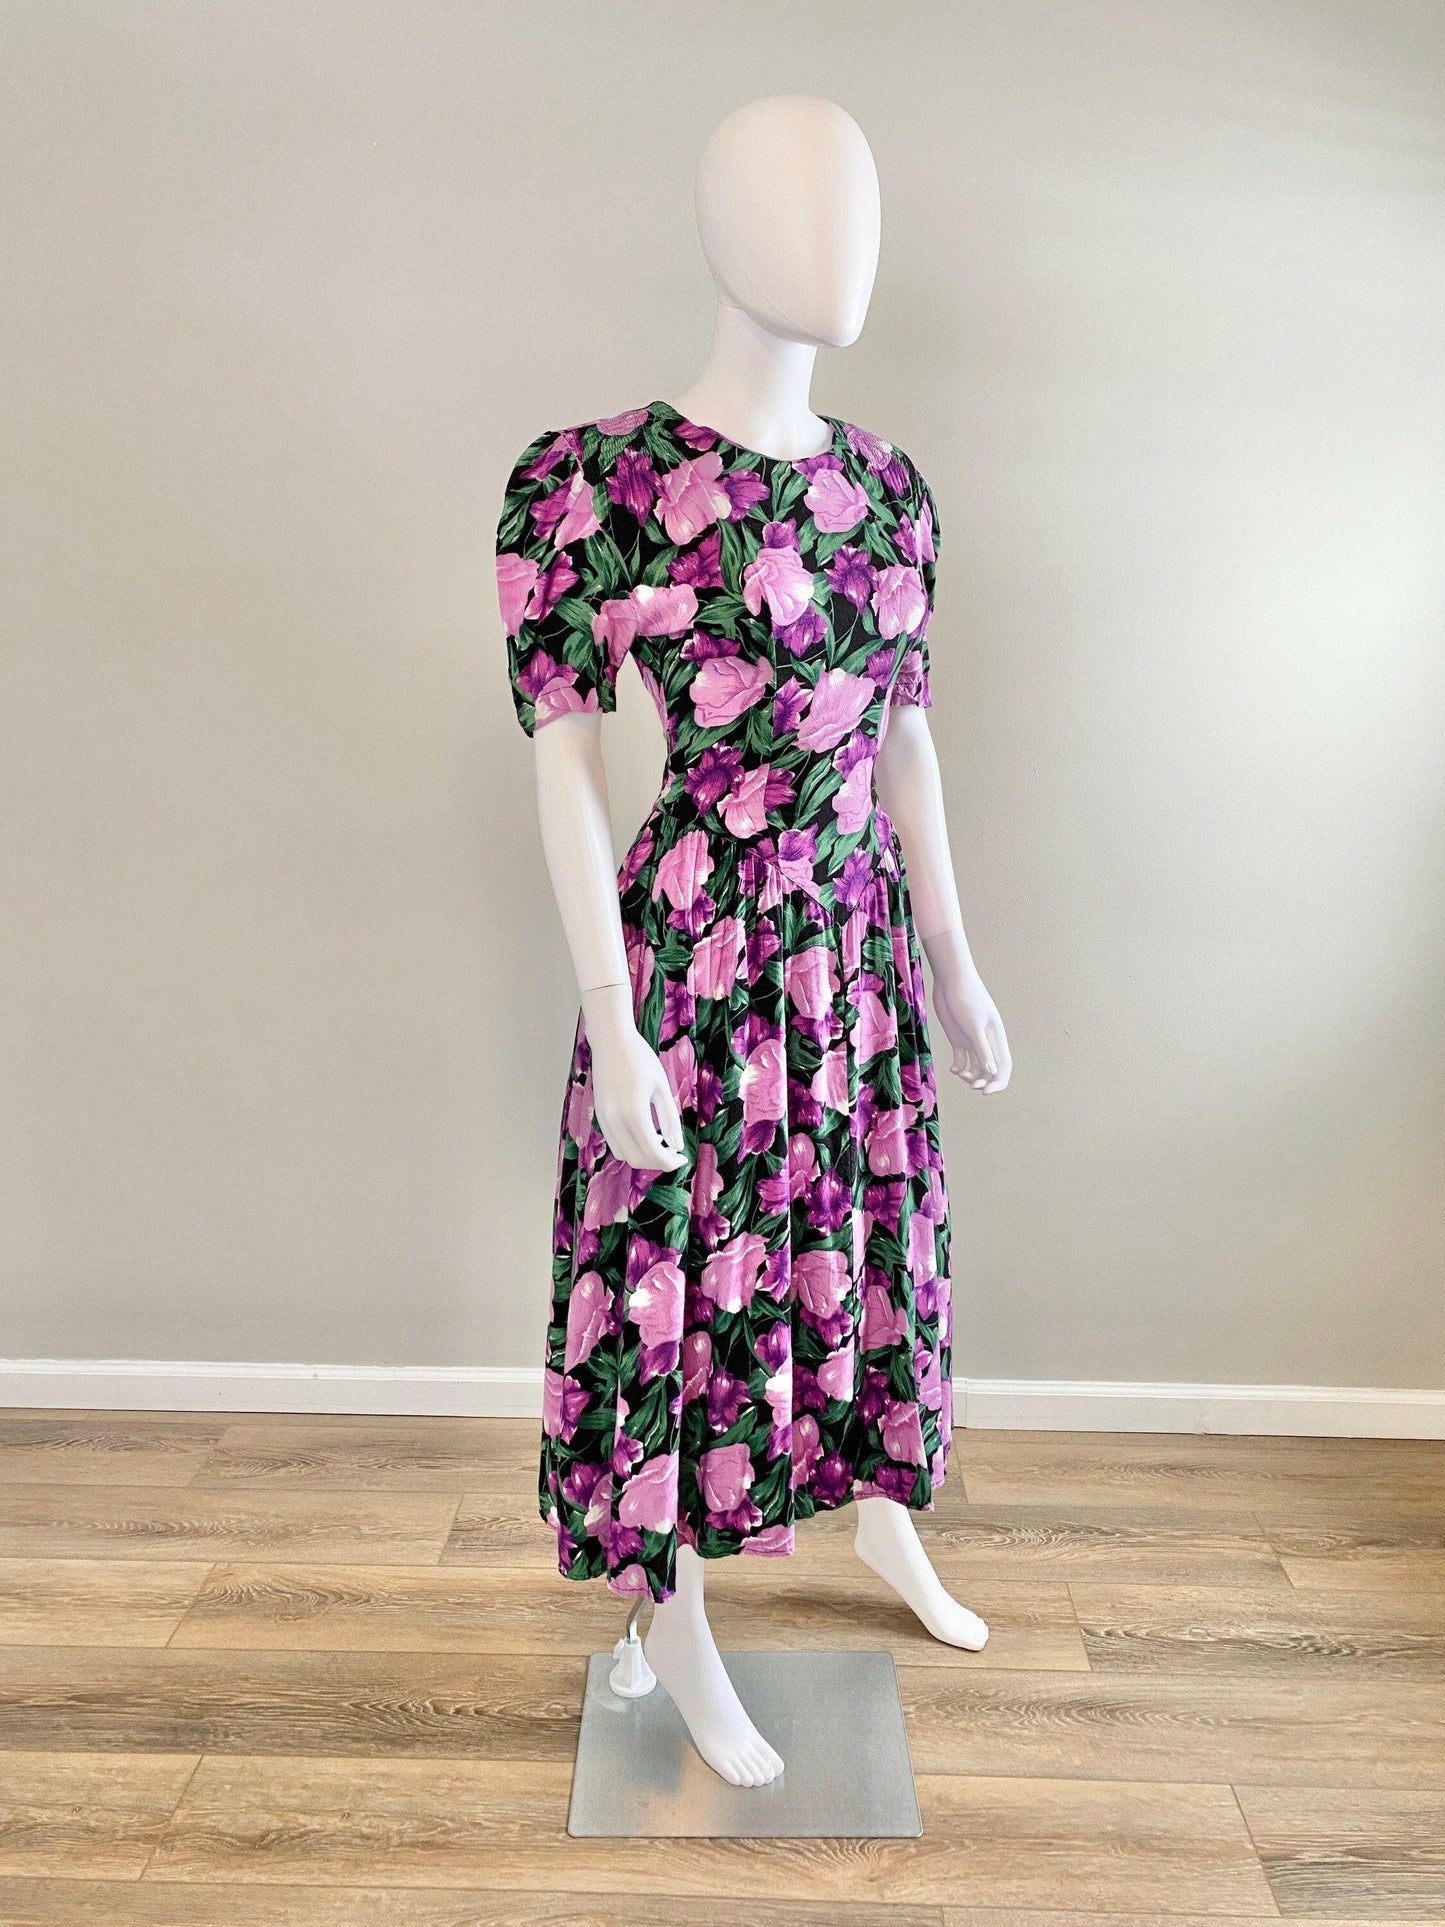 Vintage 1990s Purple Floral Rayon Puff Sleeve Dress / 90s does 30s retro party dress with pockets / Size XS S